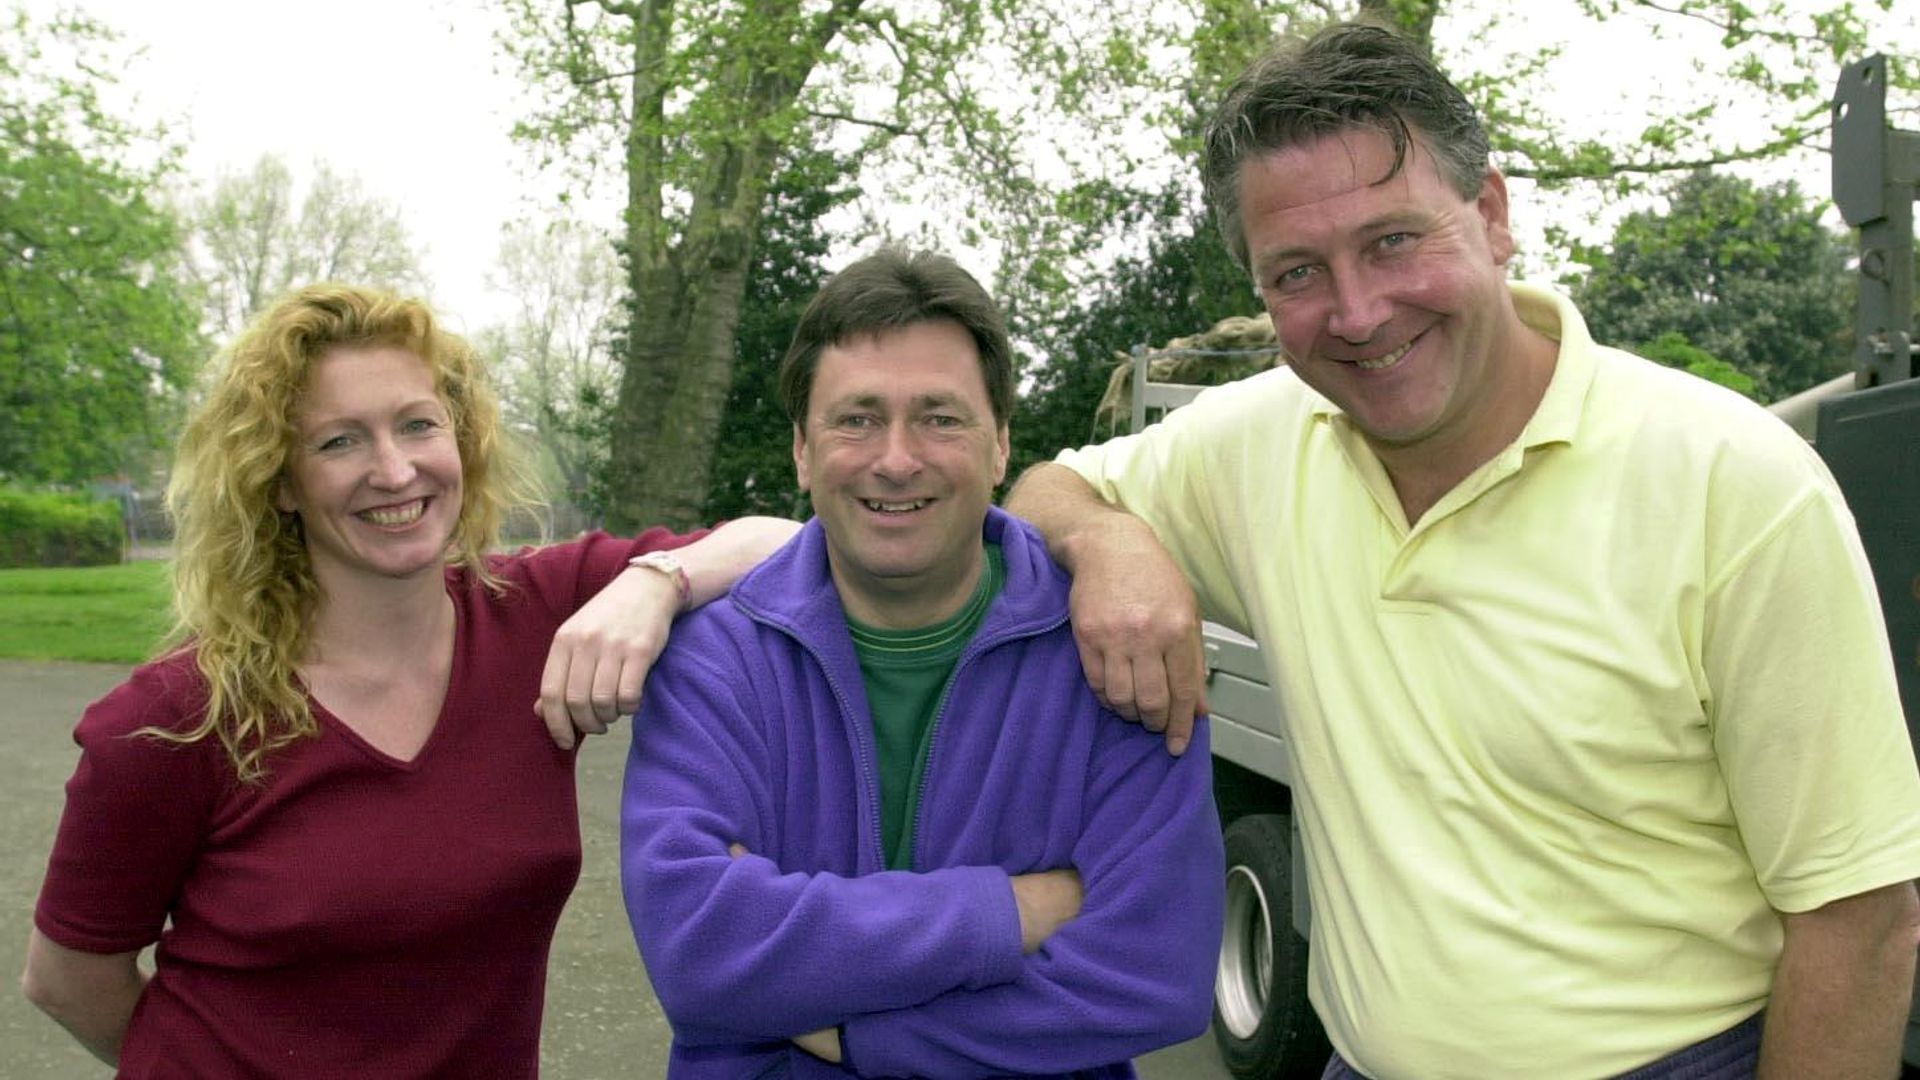 Charlie Dimmock, Alan Titchmarsh and Tommy Walsh